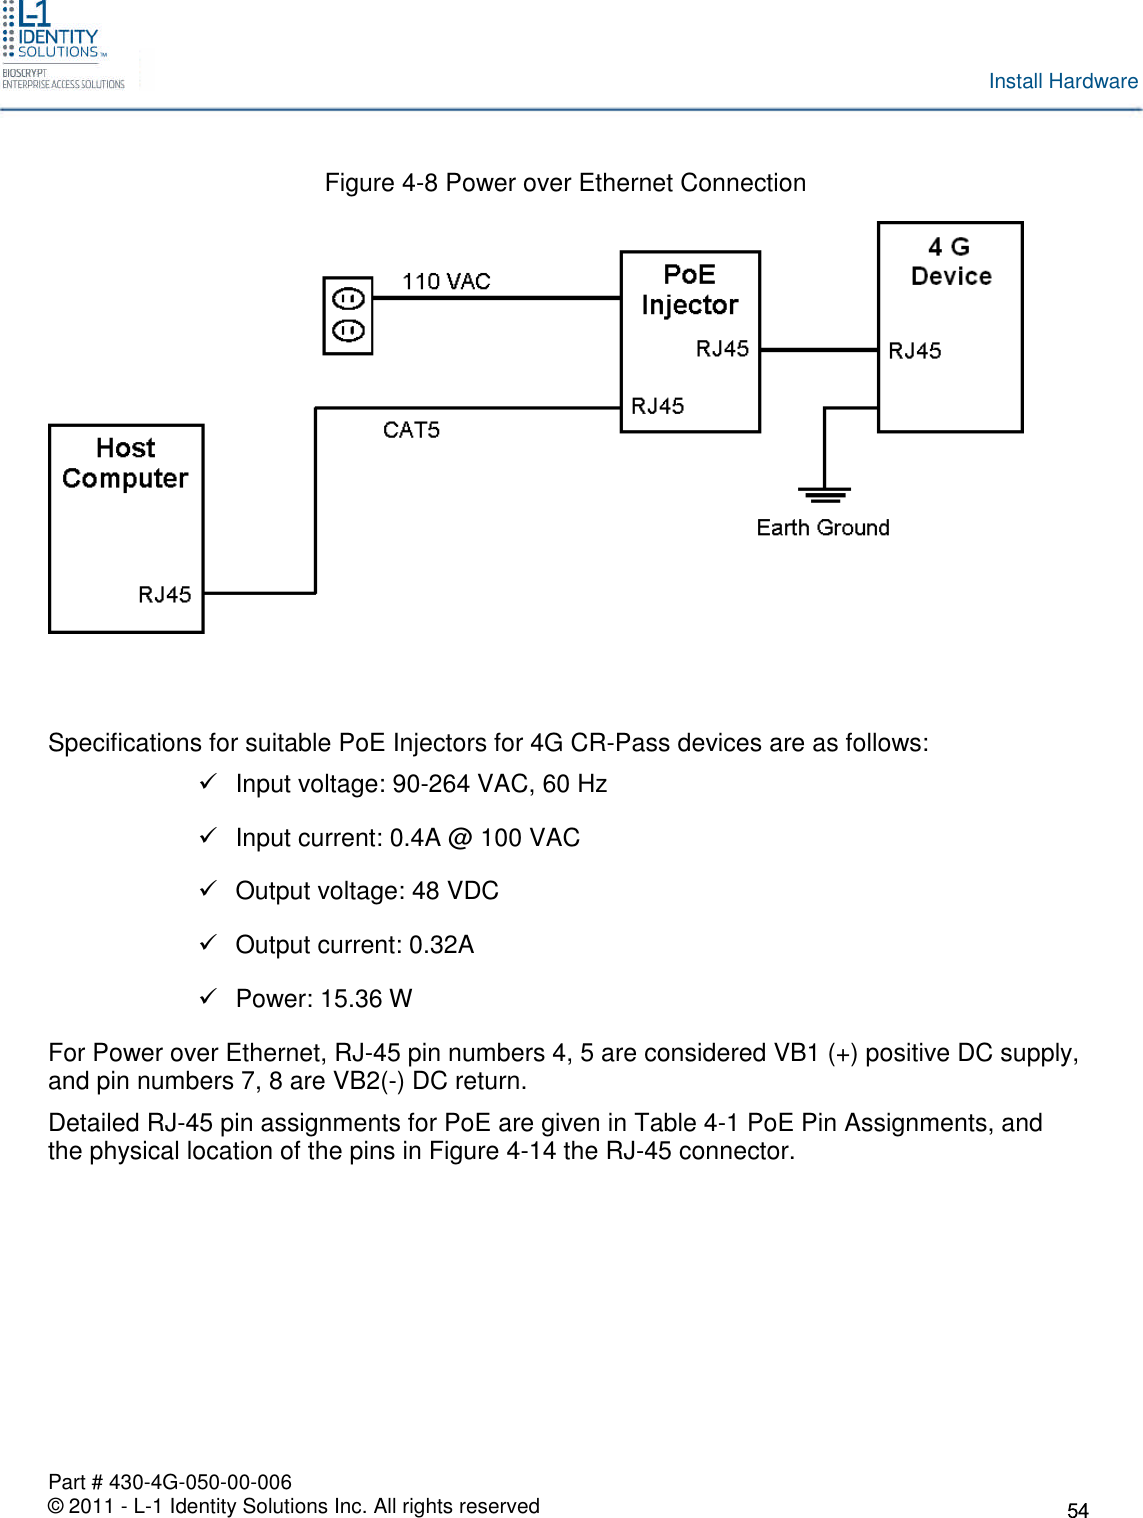 Part # 430-4G-050-00-006© 2011 - L-1 Identity Solutions Inc. All rights reservedInstall HardwareFigure 4-8 Power over Ethernet ConnectionSpecifications for suitable PoE Injectors for 4G CR-Pass devices are as follows:Input voltage: 90-264 VAC, 60 HzInput current: 0.4A @ 100 VACOutput voltage: 48 VDCOutput current: 0.32APower: 15.36 WFor Power over Ethernet, RJ-45 pin numbers 4, 5 are considered VB1 (+) positive DC supply,and pin numbers 7, 8 are VB2(-) DC return.Detailed RJ-45 pin assignments for PoE are given in Table 4-1 PoE Pin Assignments, andthe physical location of the pins in Figure 4-14 the RJ-45 connector.